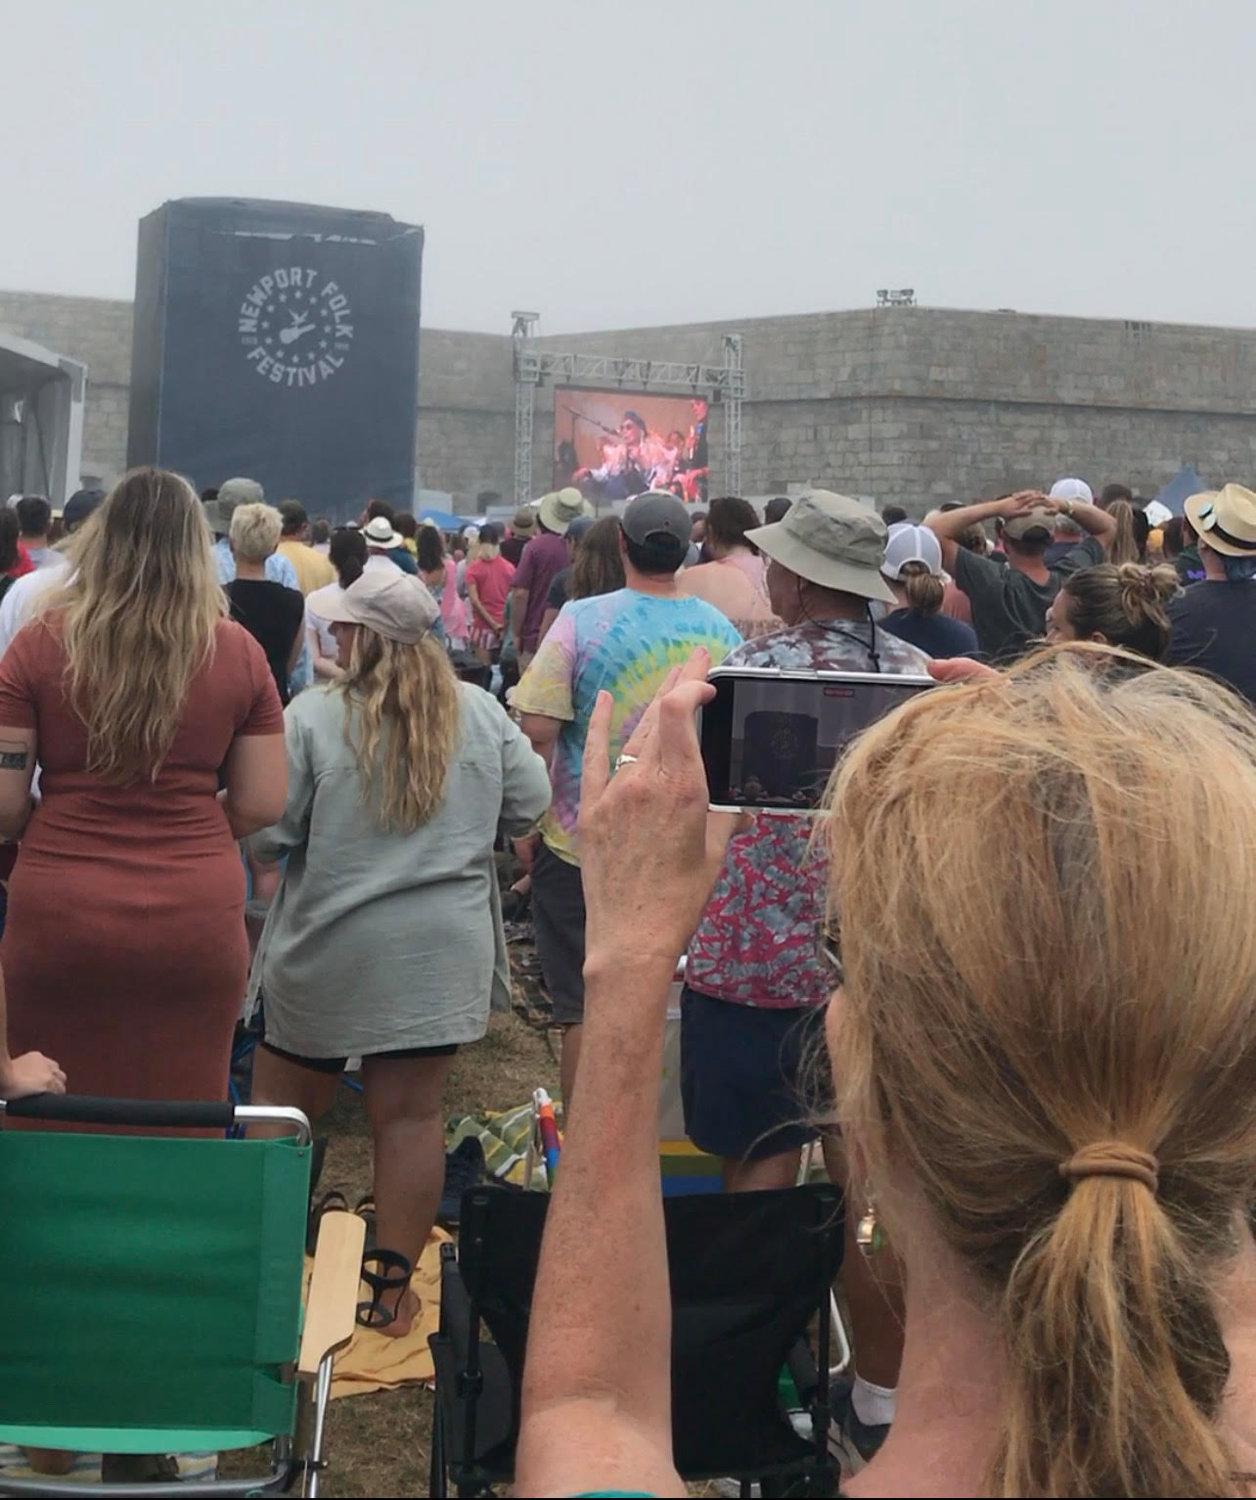 In a surprise appearance, iconic singer-songwriter Joni Mitchell performed at the Newport Folk Festival on July 24. The event marked her return to the stage she last performed on in 1969. The beloved 78-year-old was warmly embraced by a highly enthusiastic crowd of all ages. Visit the Newport Folk Festival’s YouTube channel for videos of the event (www.youtube.com/user/NewportFolkFest )...